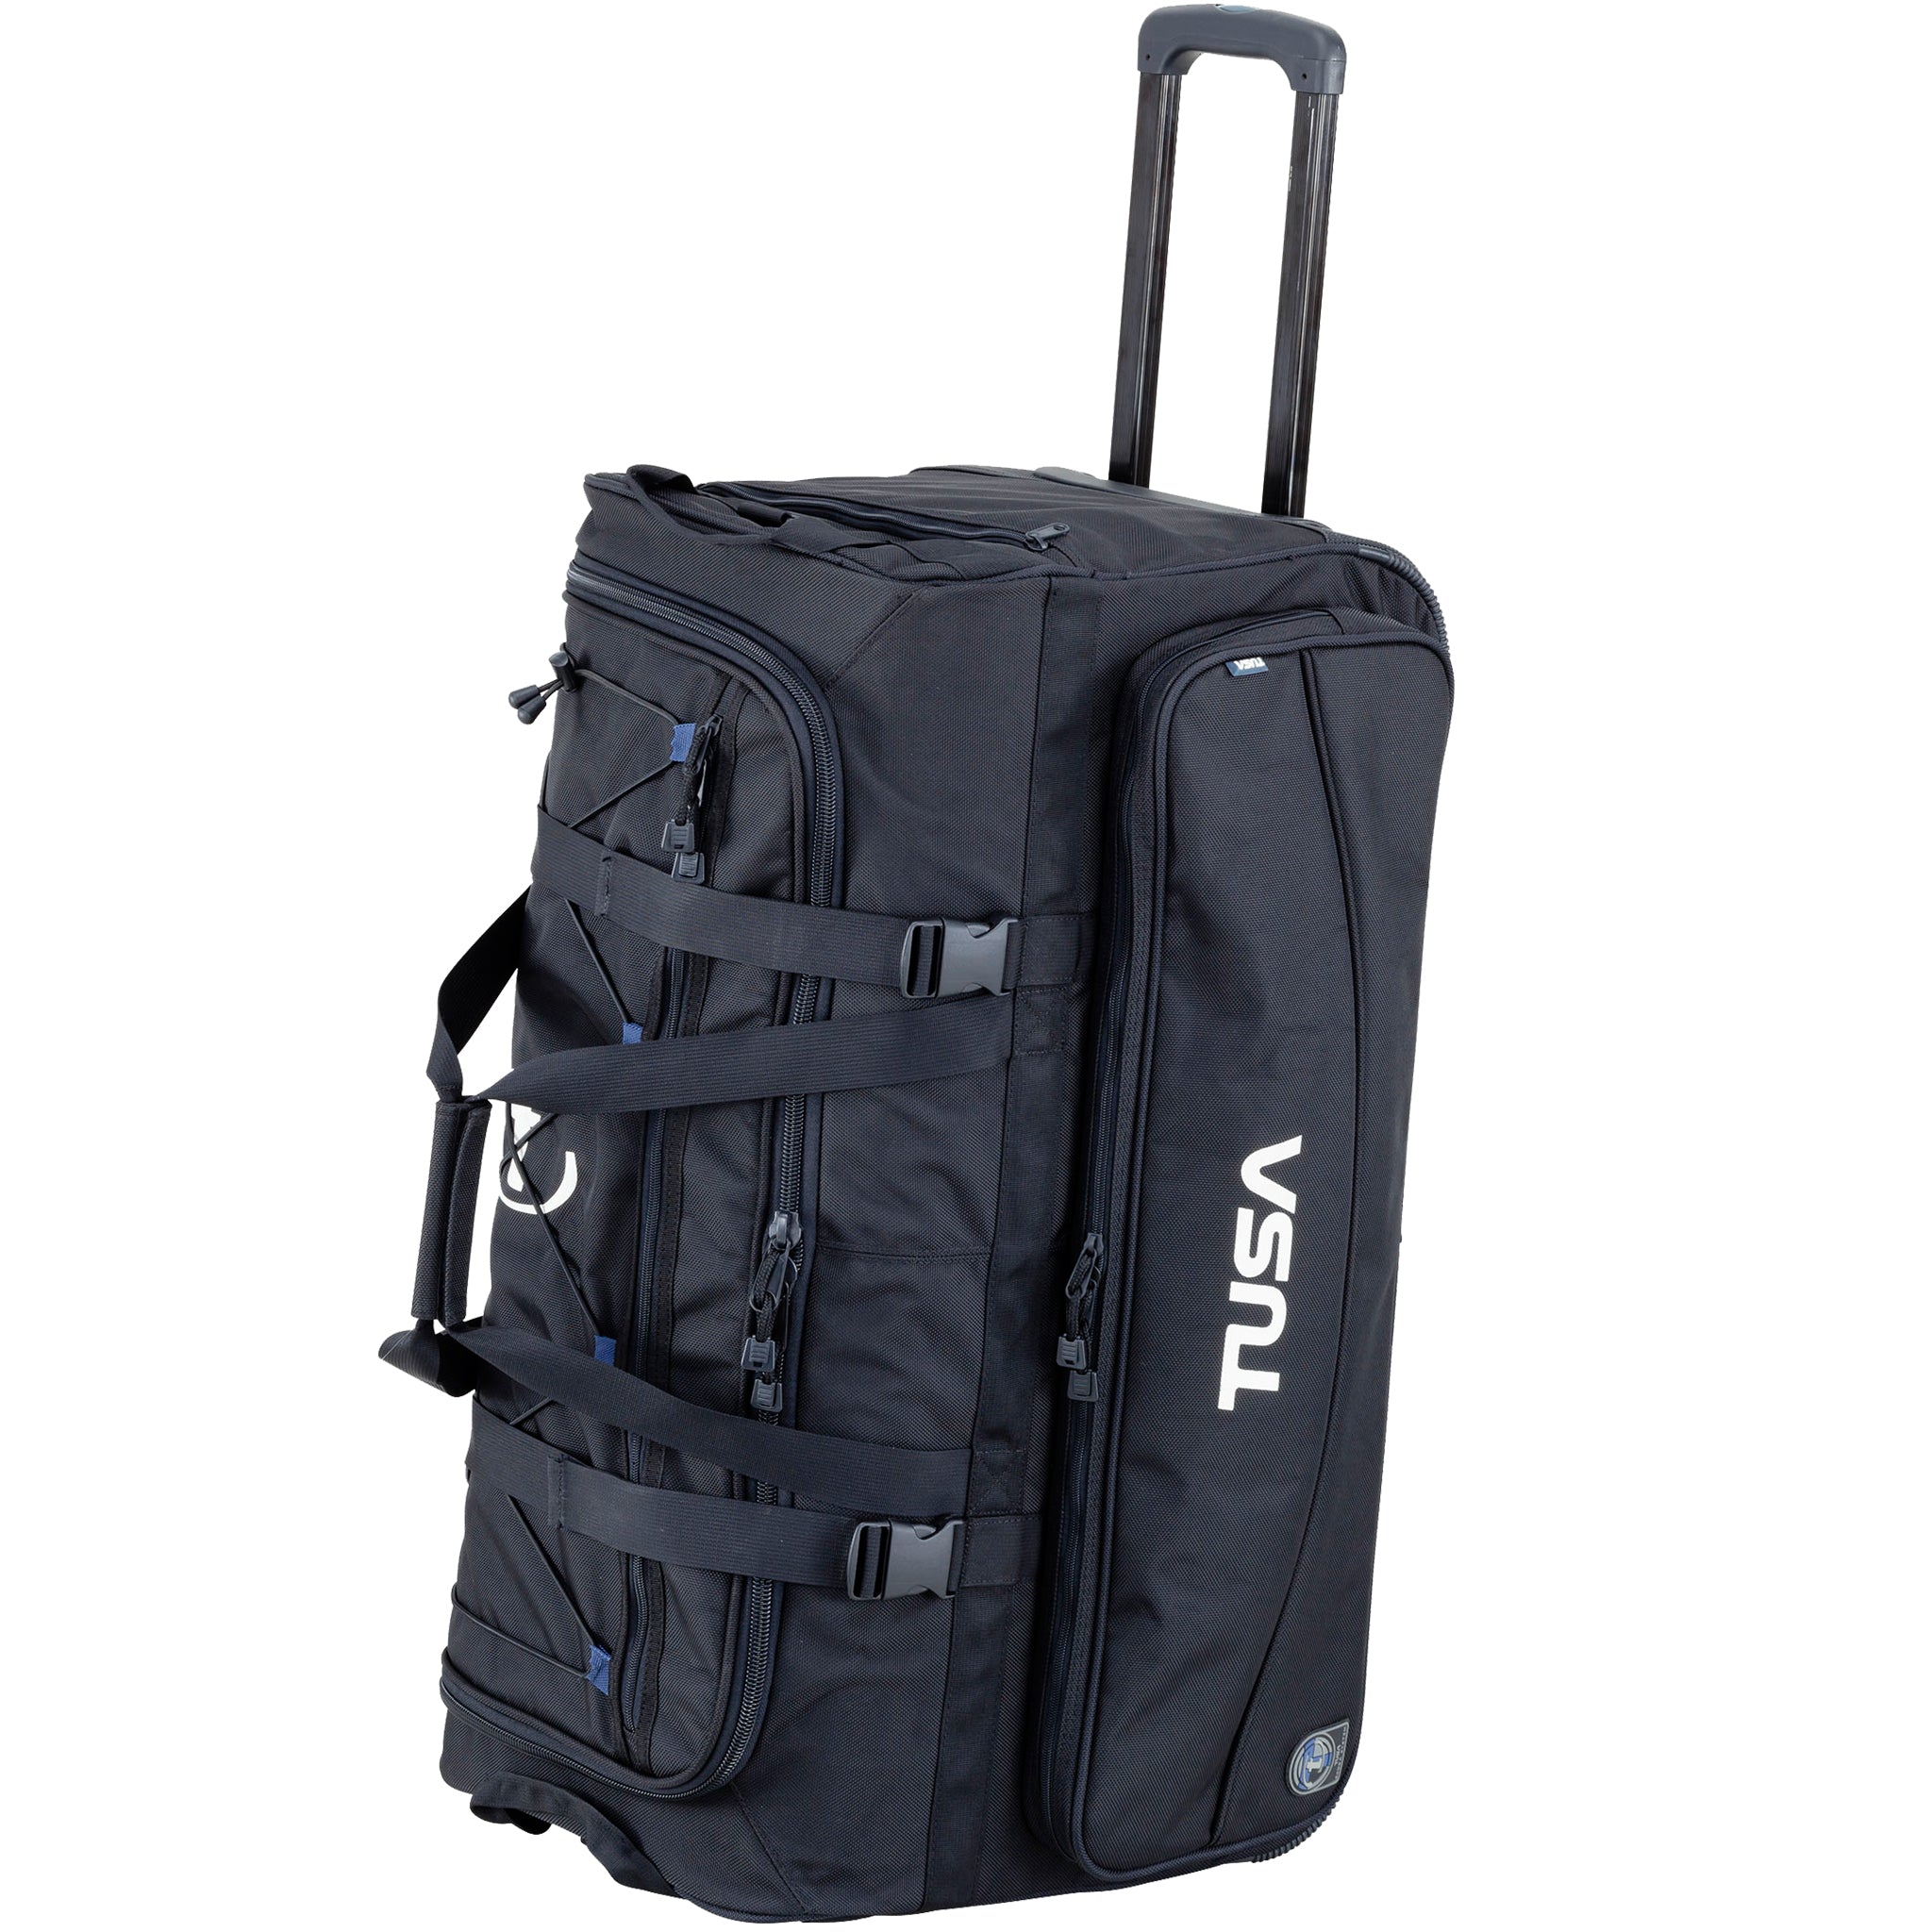 Tusa Roller Duffle Bag | Handle Extended